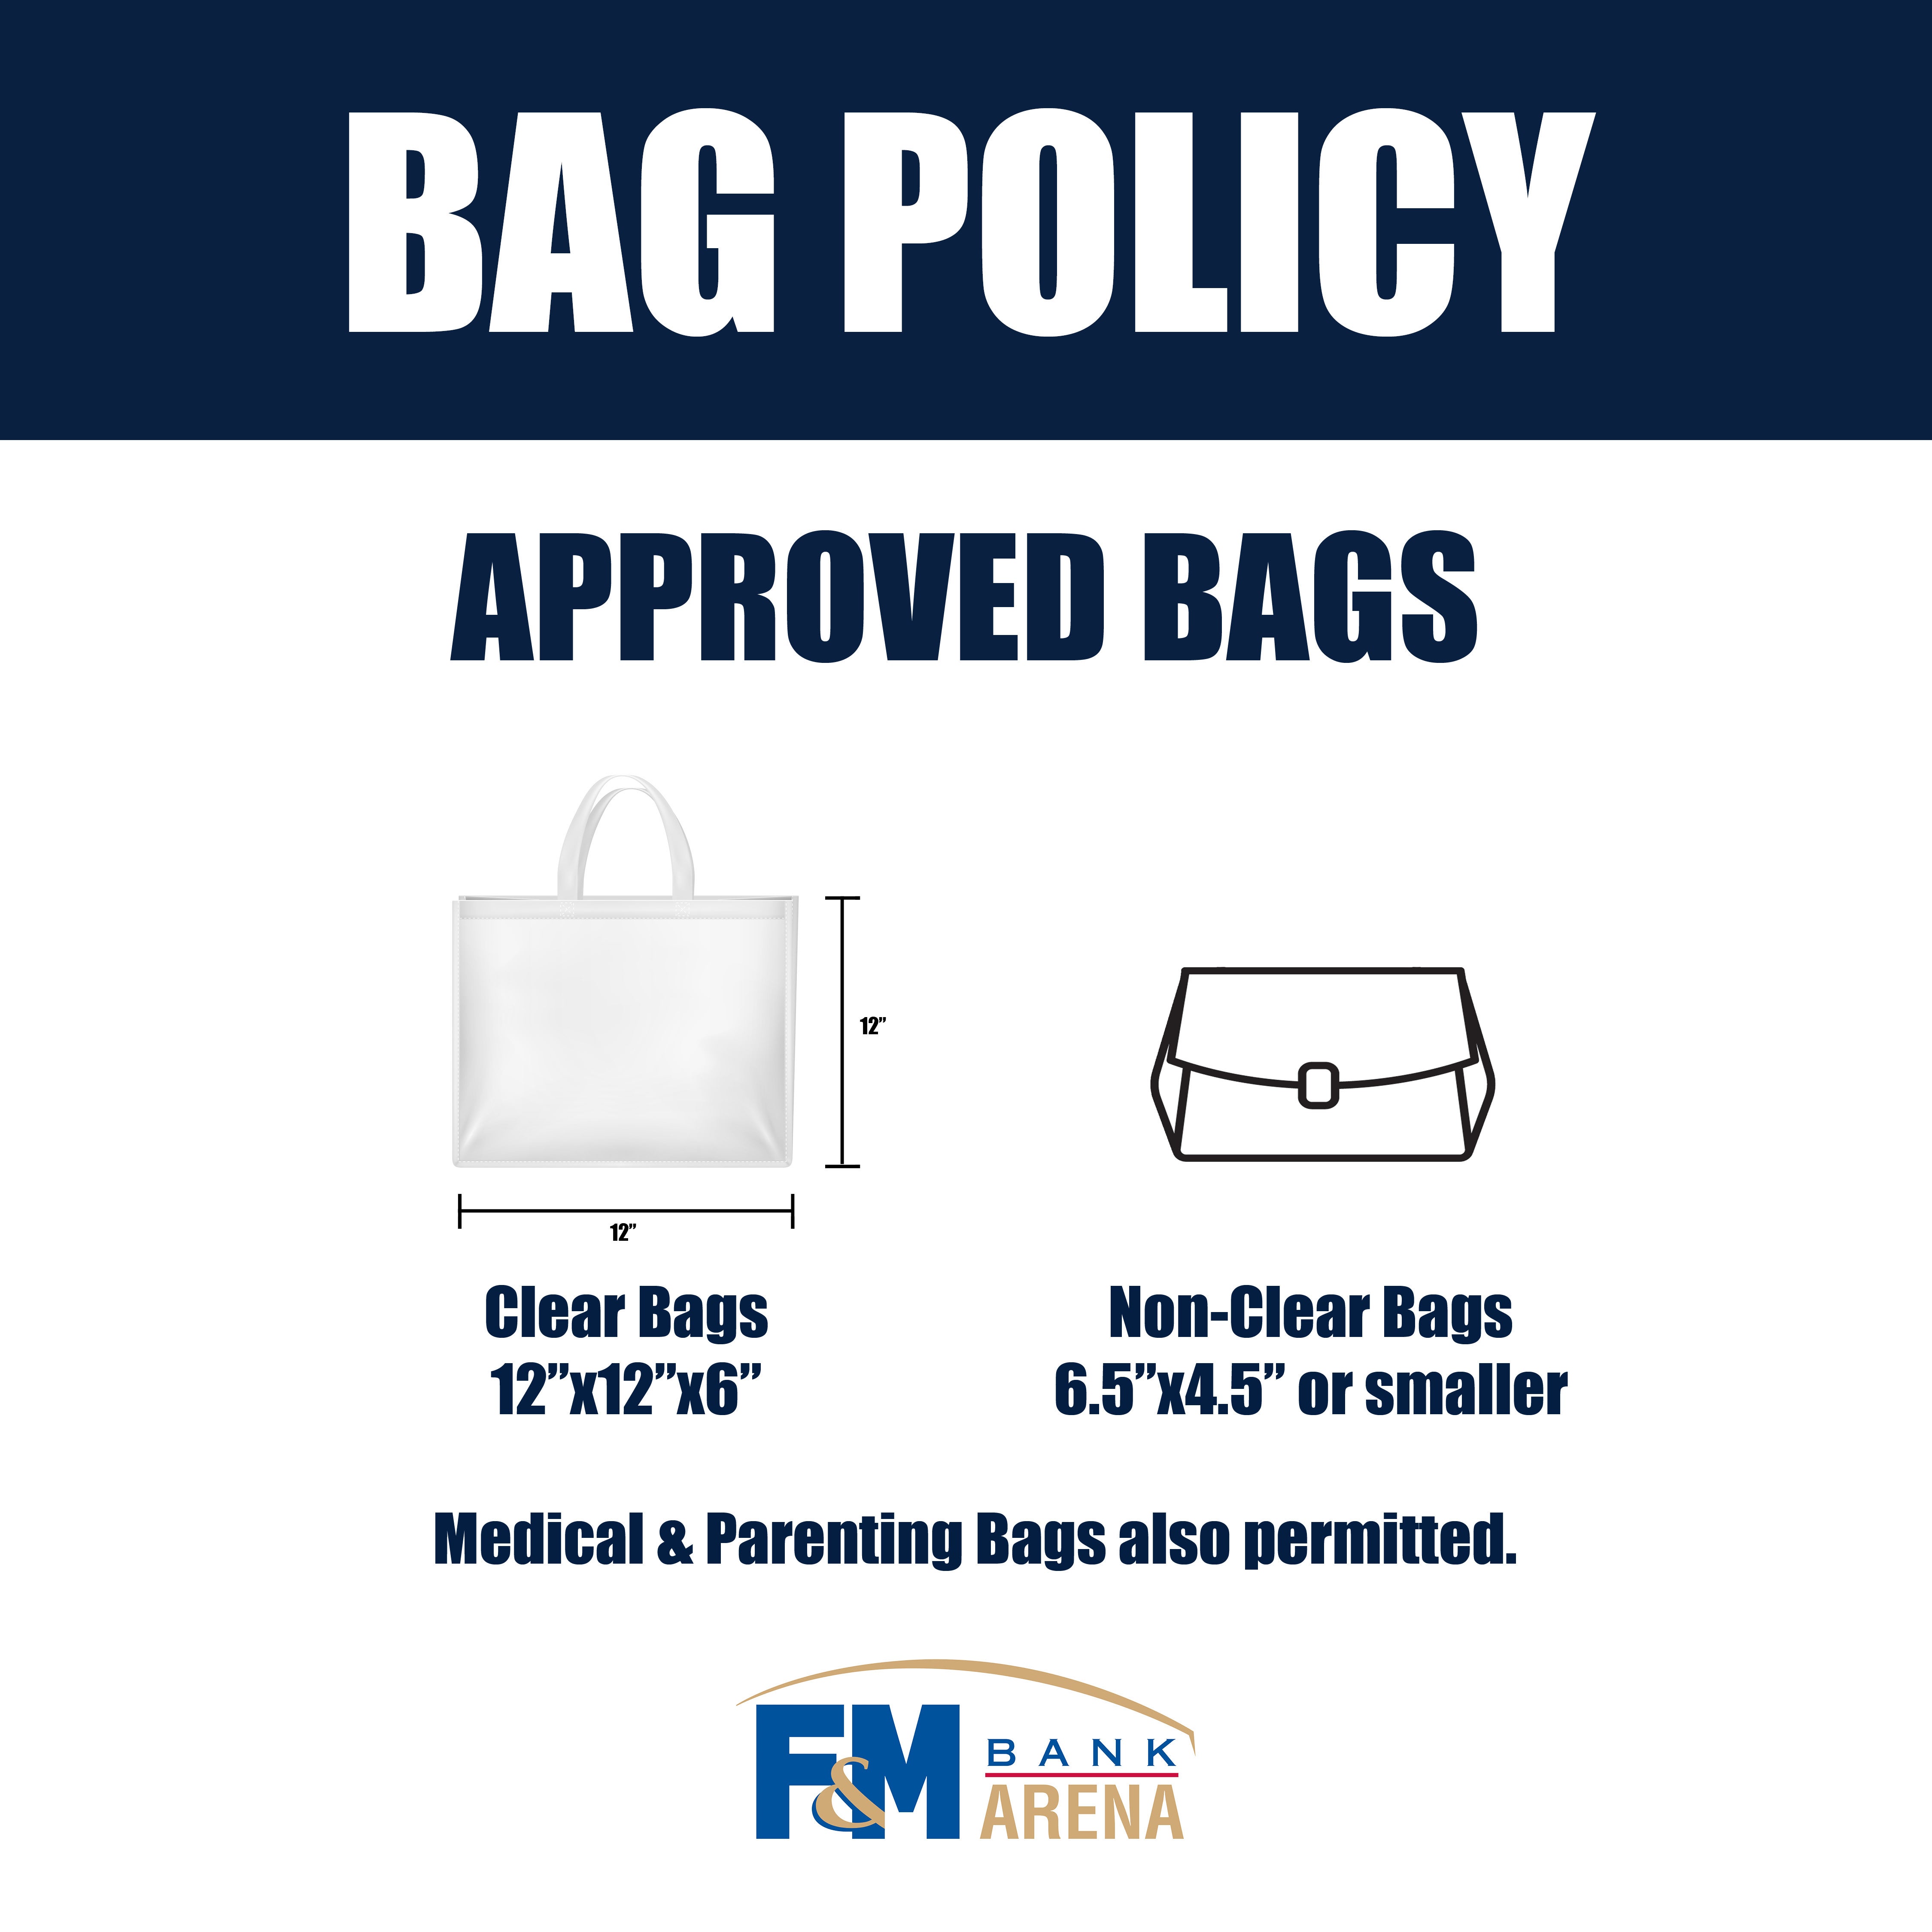 APPROVED BAGS: Medical bags, parenting bags, CLEAR bags (12”x12”x6”) and NON-CLEAR bags (6.5”x4.5” or smaller)